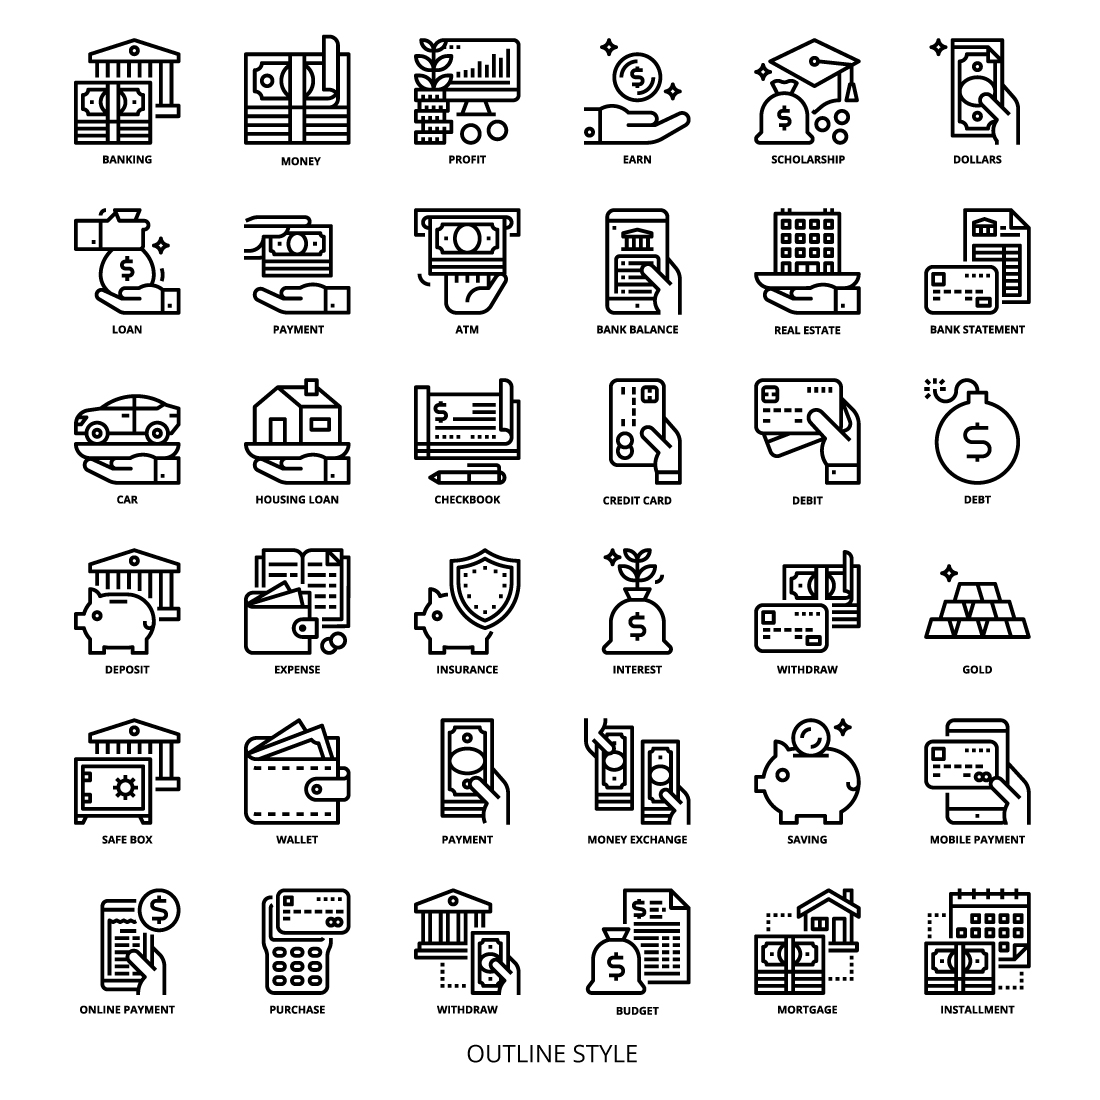 36 Banking Icons Set x 4 Styles preview image.